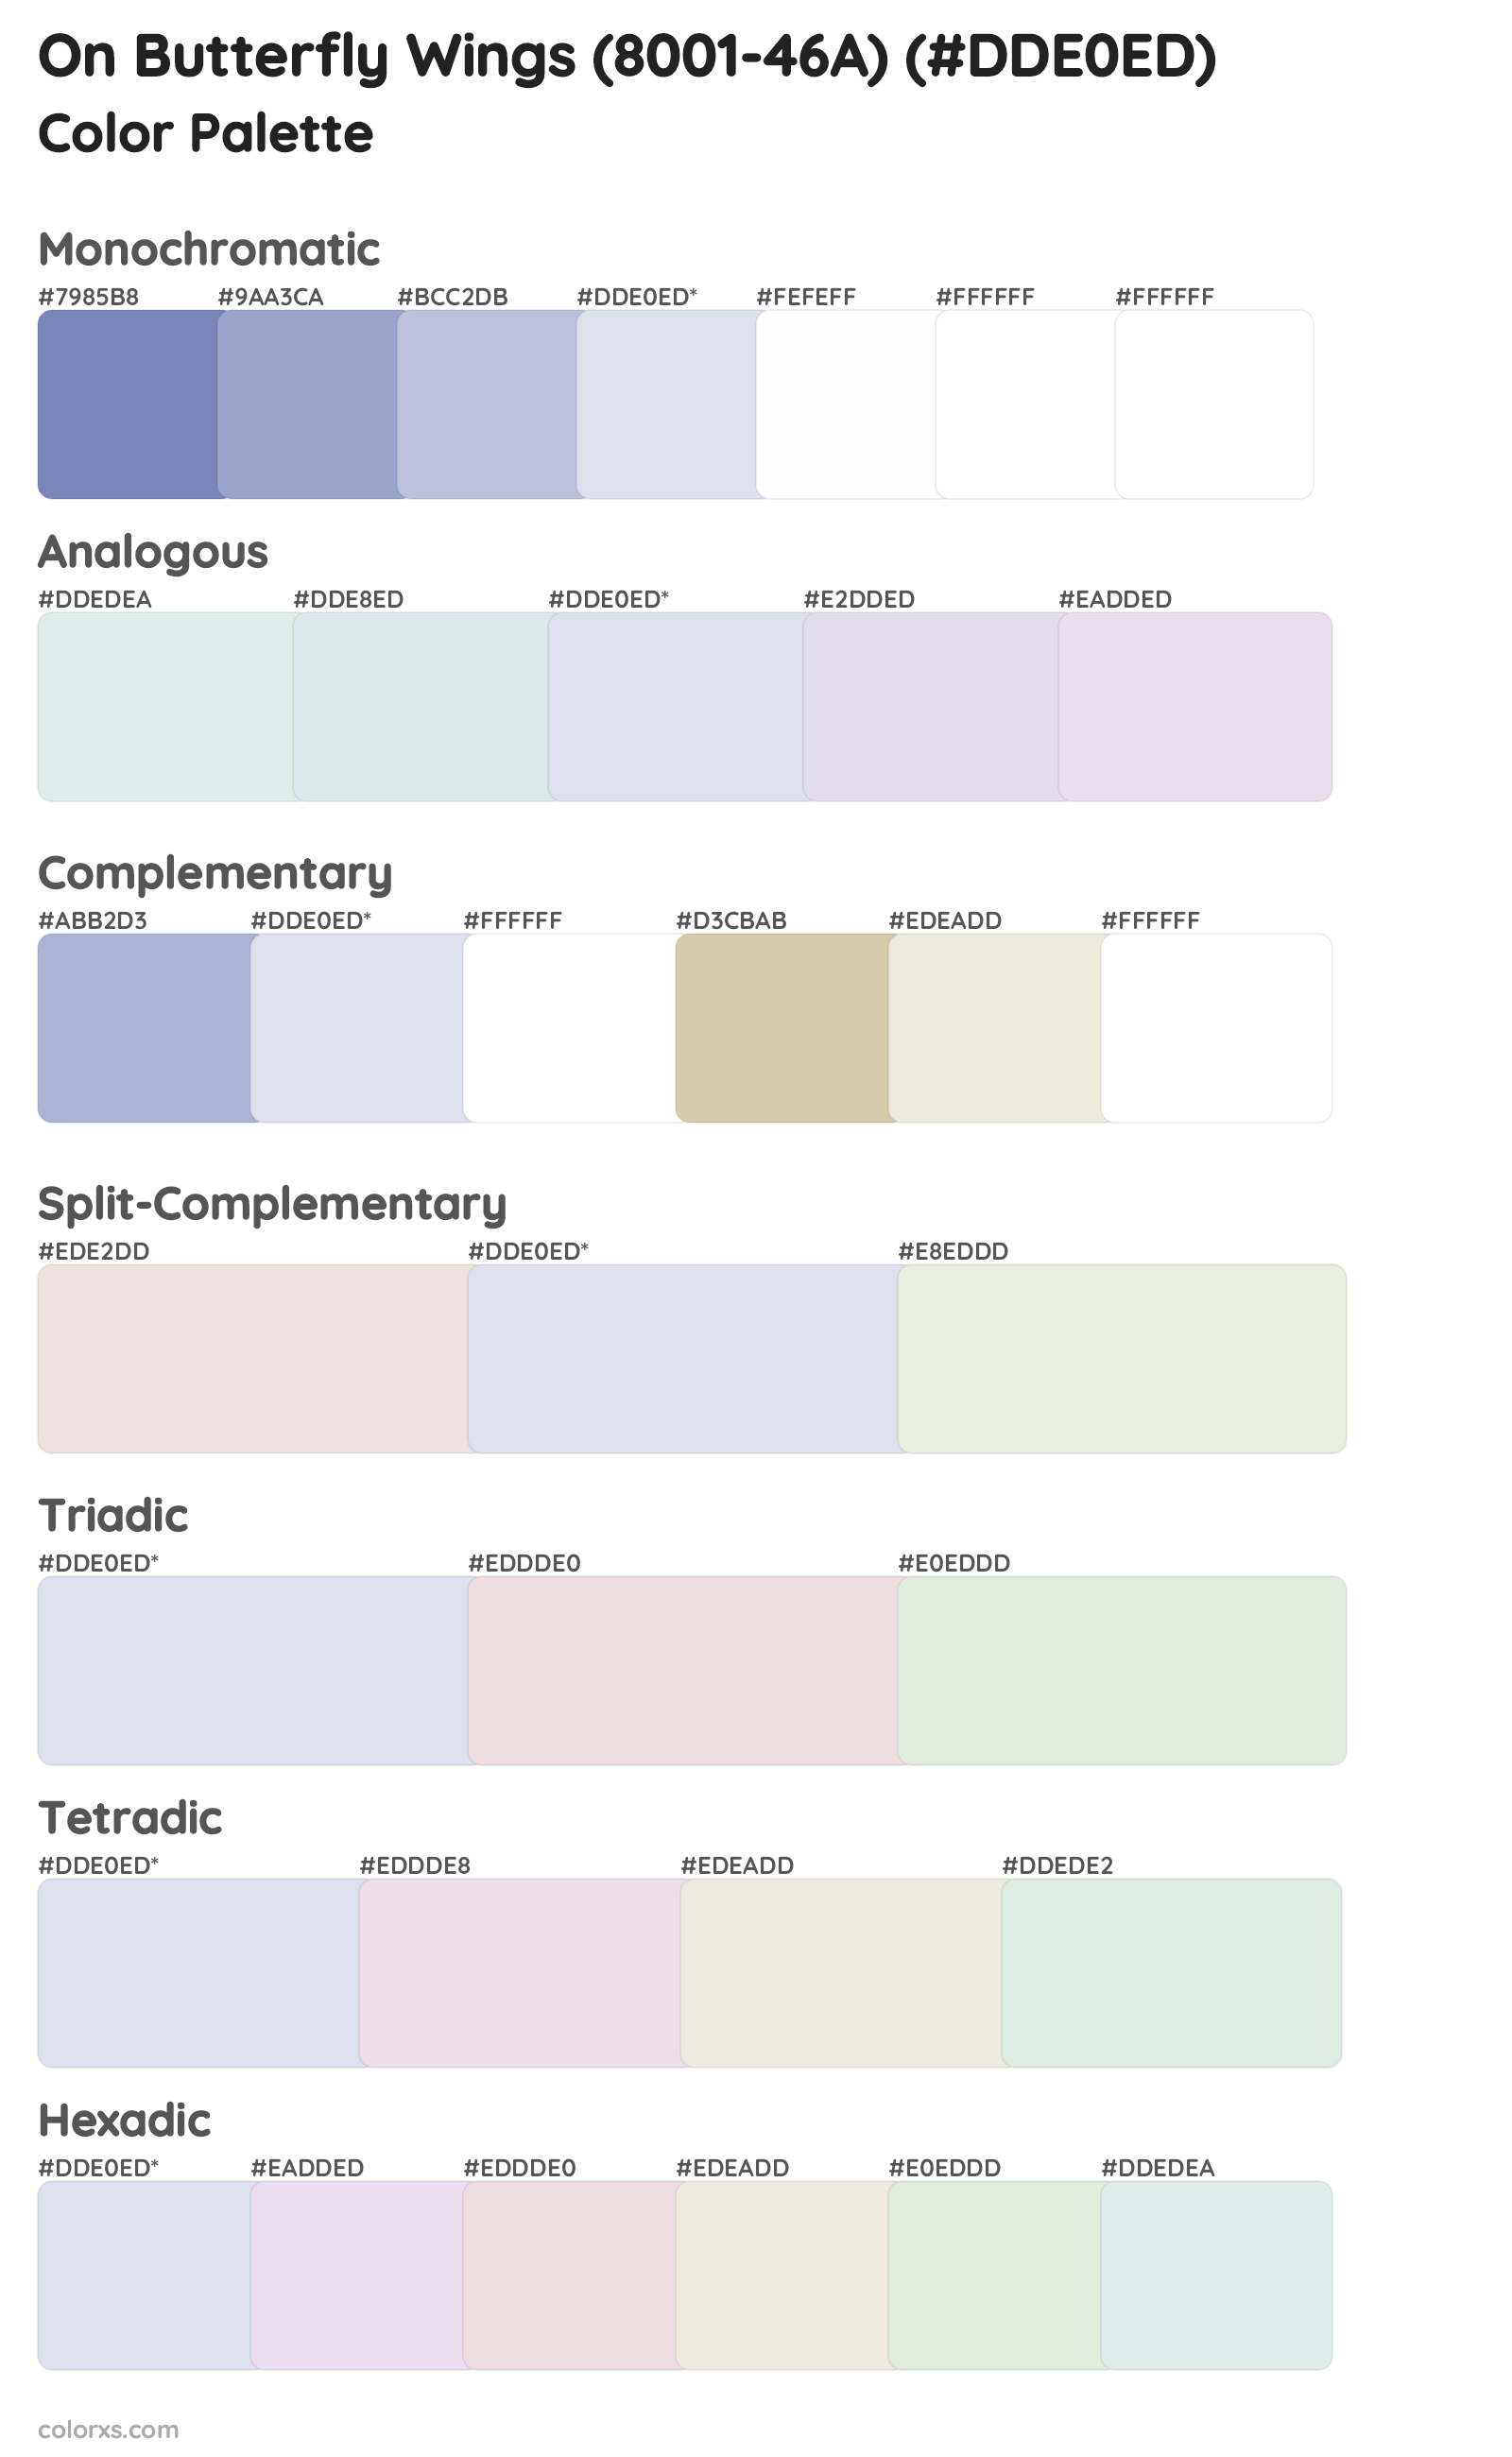 On Butterfly Wings (8001-46A) Color Scheme Palettes